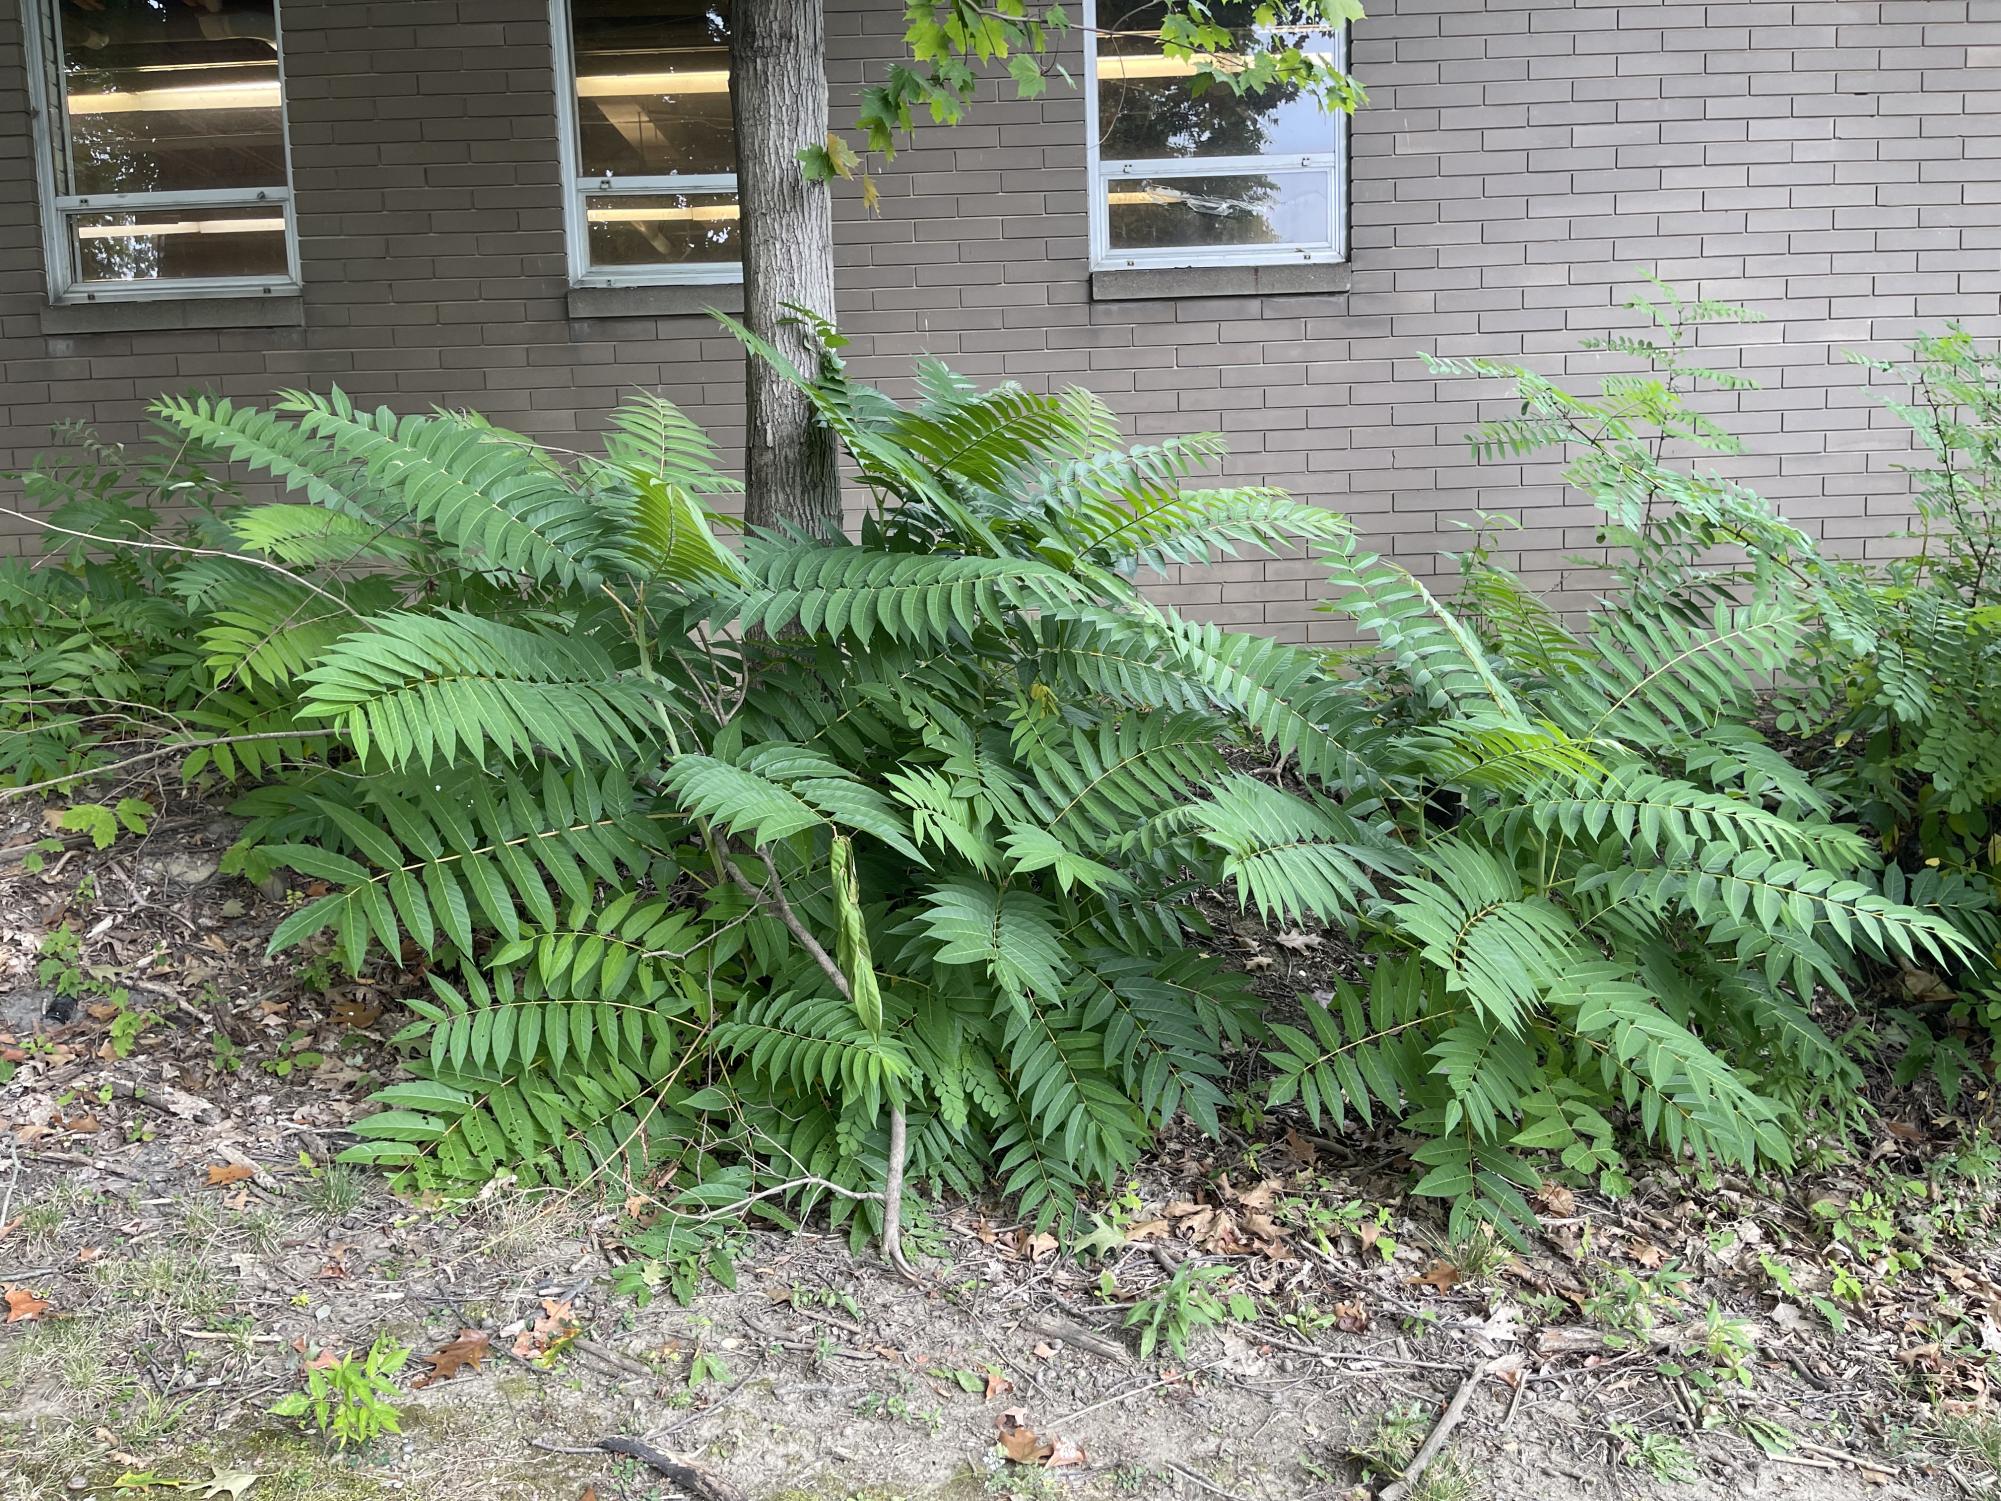 Young Tree of Heaven sprouts line the building adjacent to the parking lot. The tree is invasive and spreads incredibly efficiently, throttling nearby native trees.